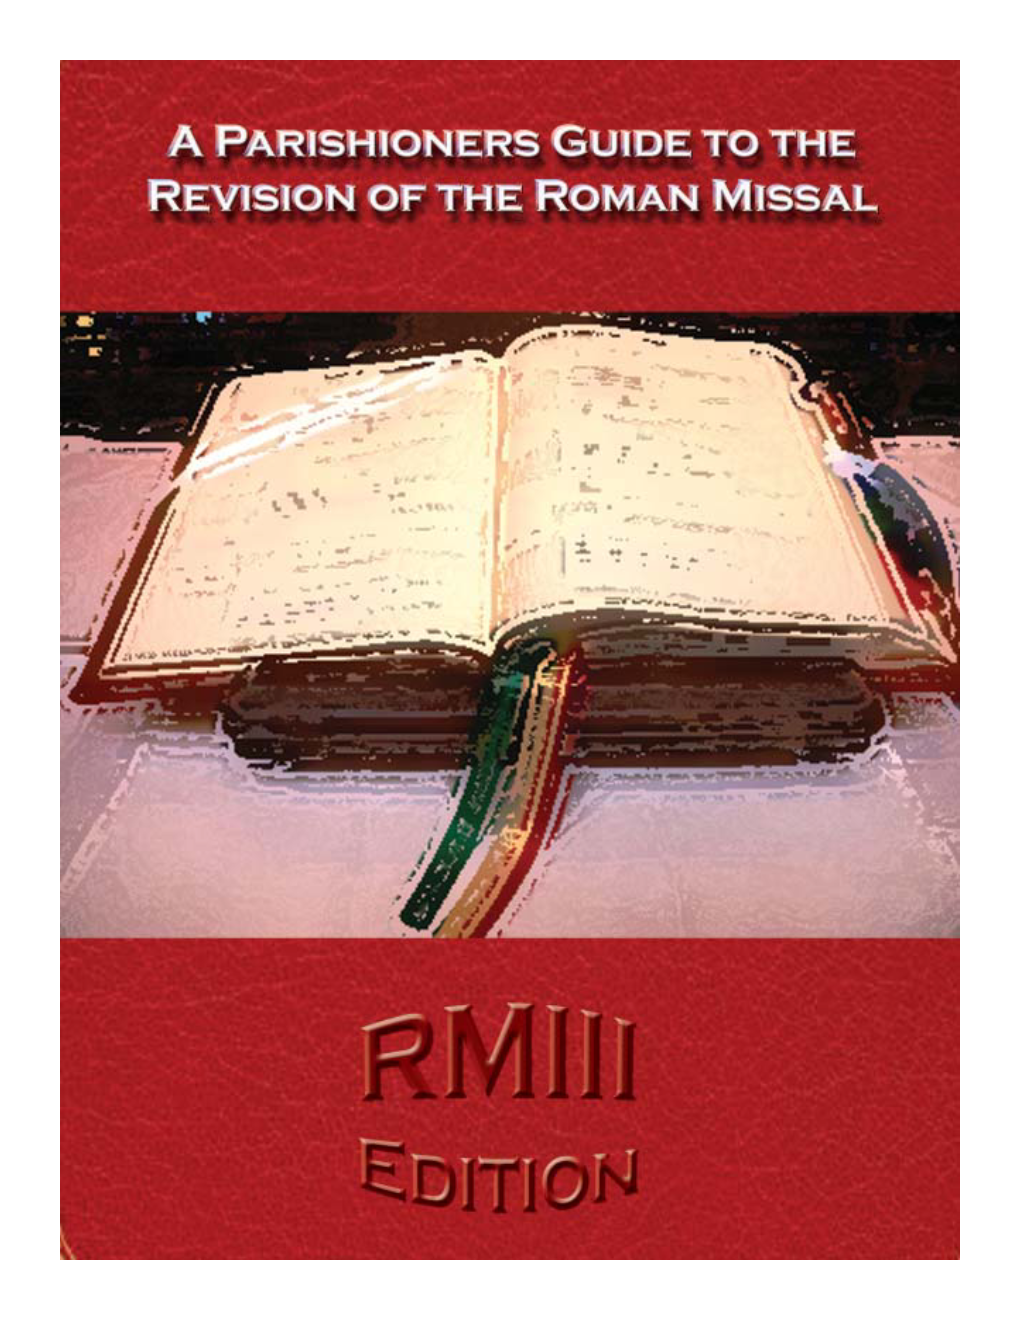 A Parishioner's Guide to the Revision of the Roman Missal Handout